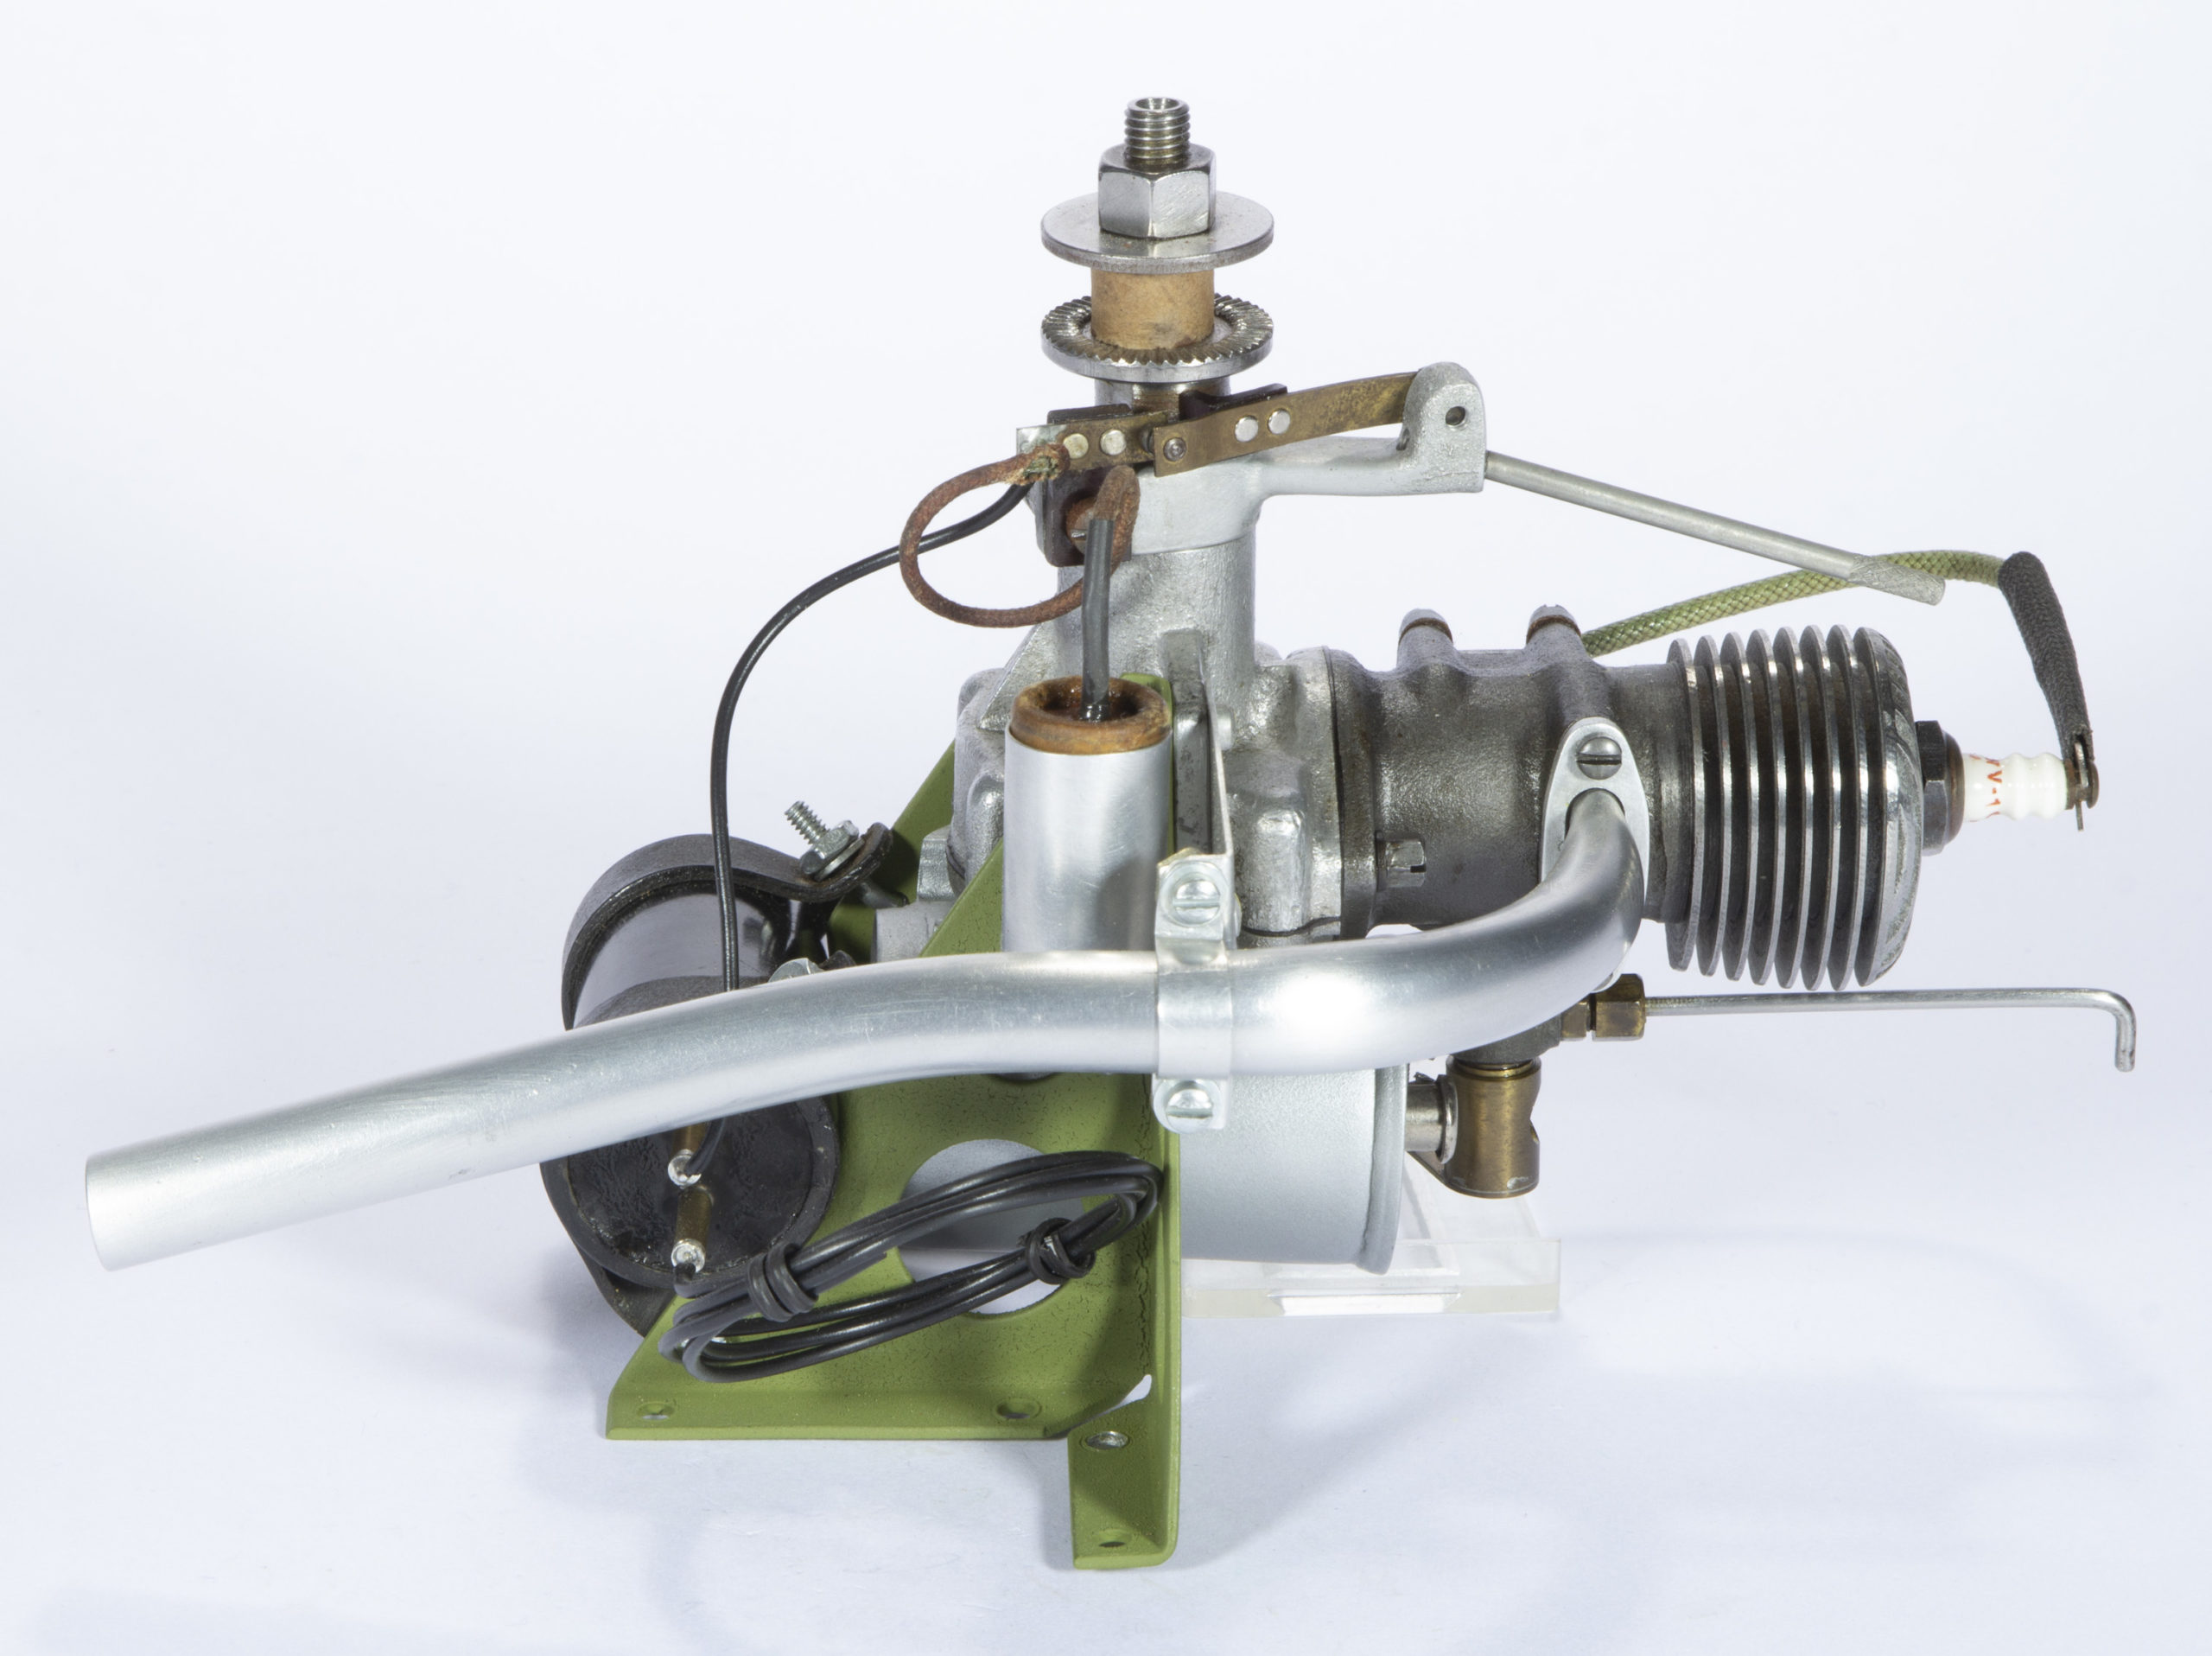 DENNYMITE INDUSTRIES “AIRSTREAM DELUXE” 1938 MODEL AIRPLANE ENGINE,